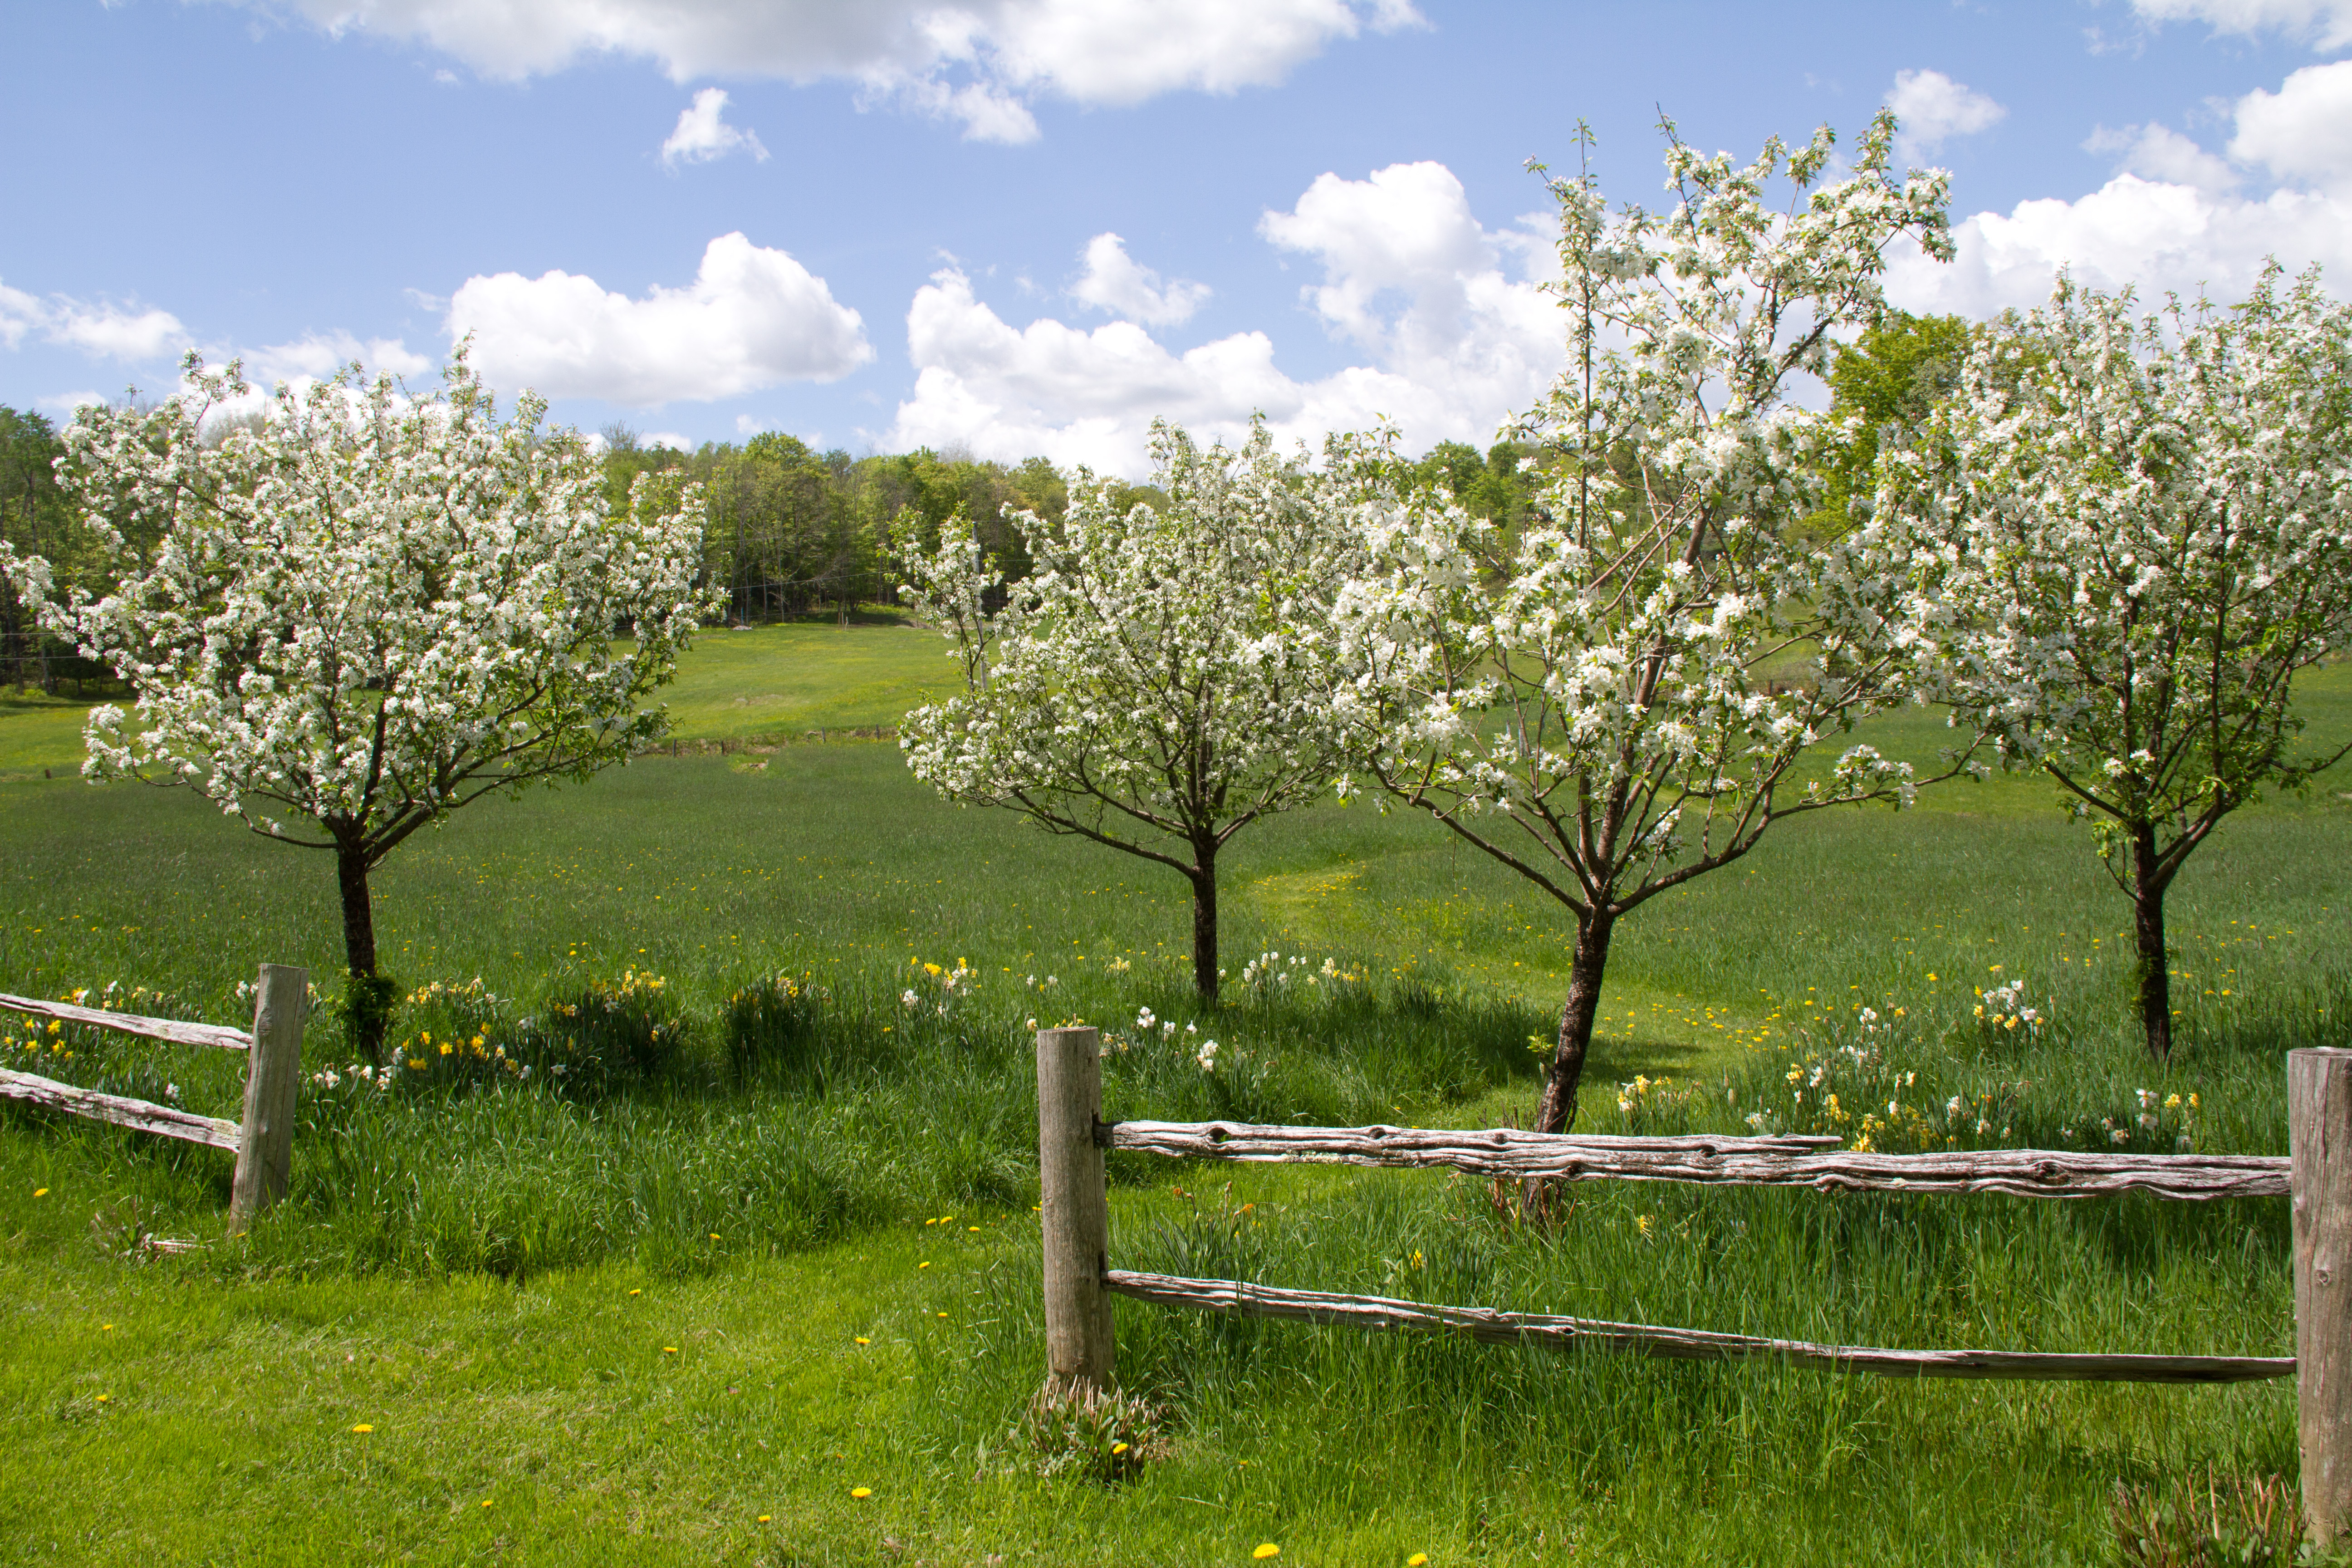 These crabapple trees are in my daughter's garden in North Hatley, Quebec.